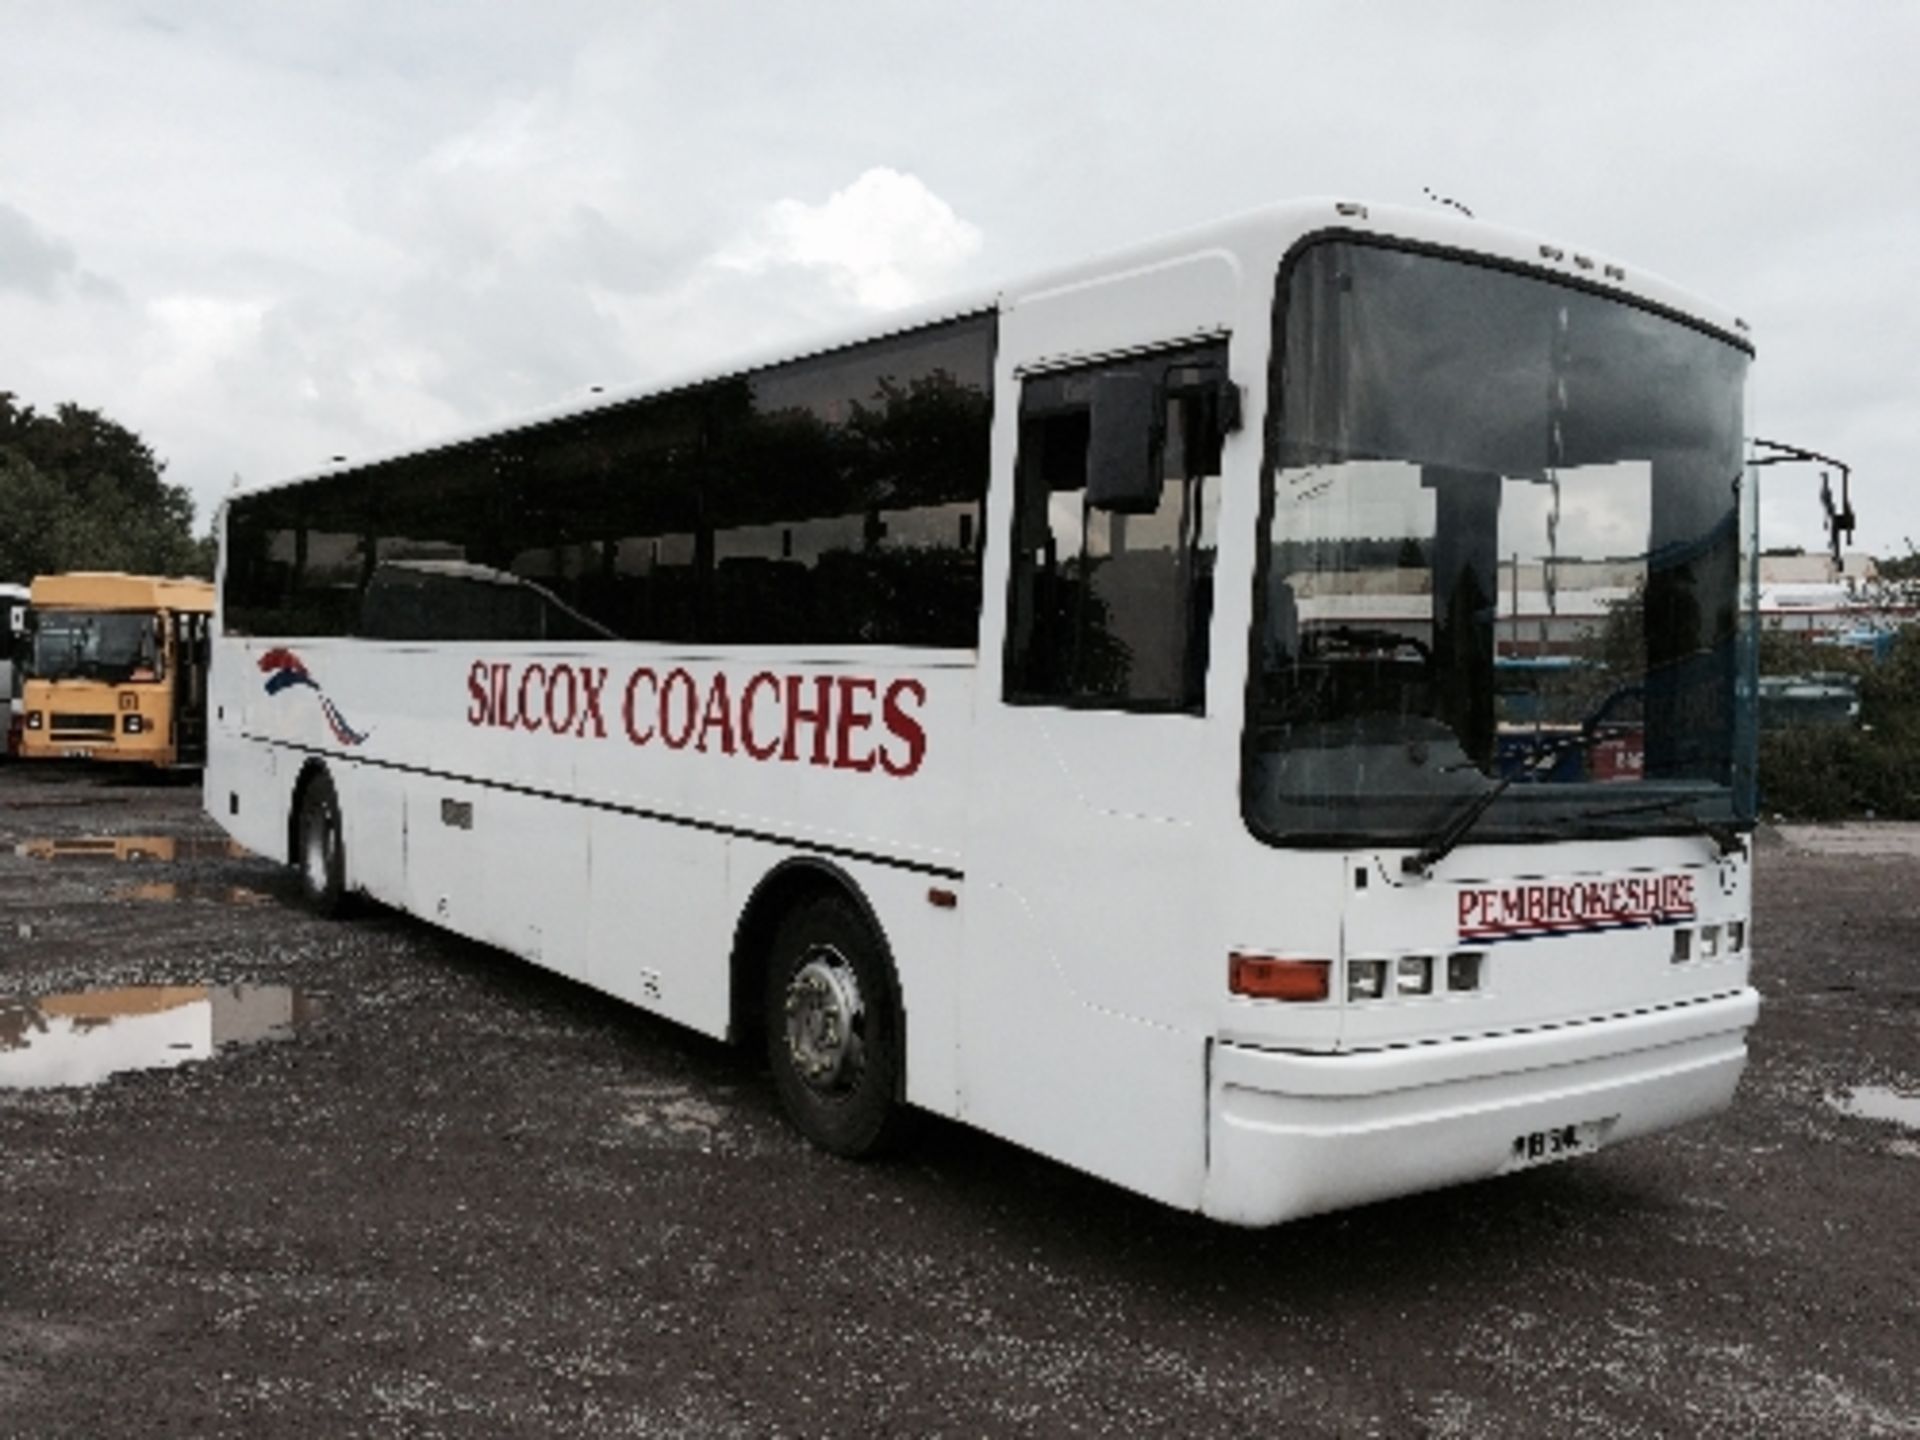 Dennis Javelin / UVG S320 Cutlass 70 seater capacity coach, 3 point seat belts, Registration No. M18 - Image 3 of 6